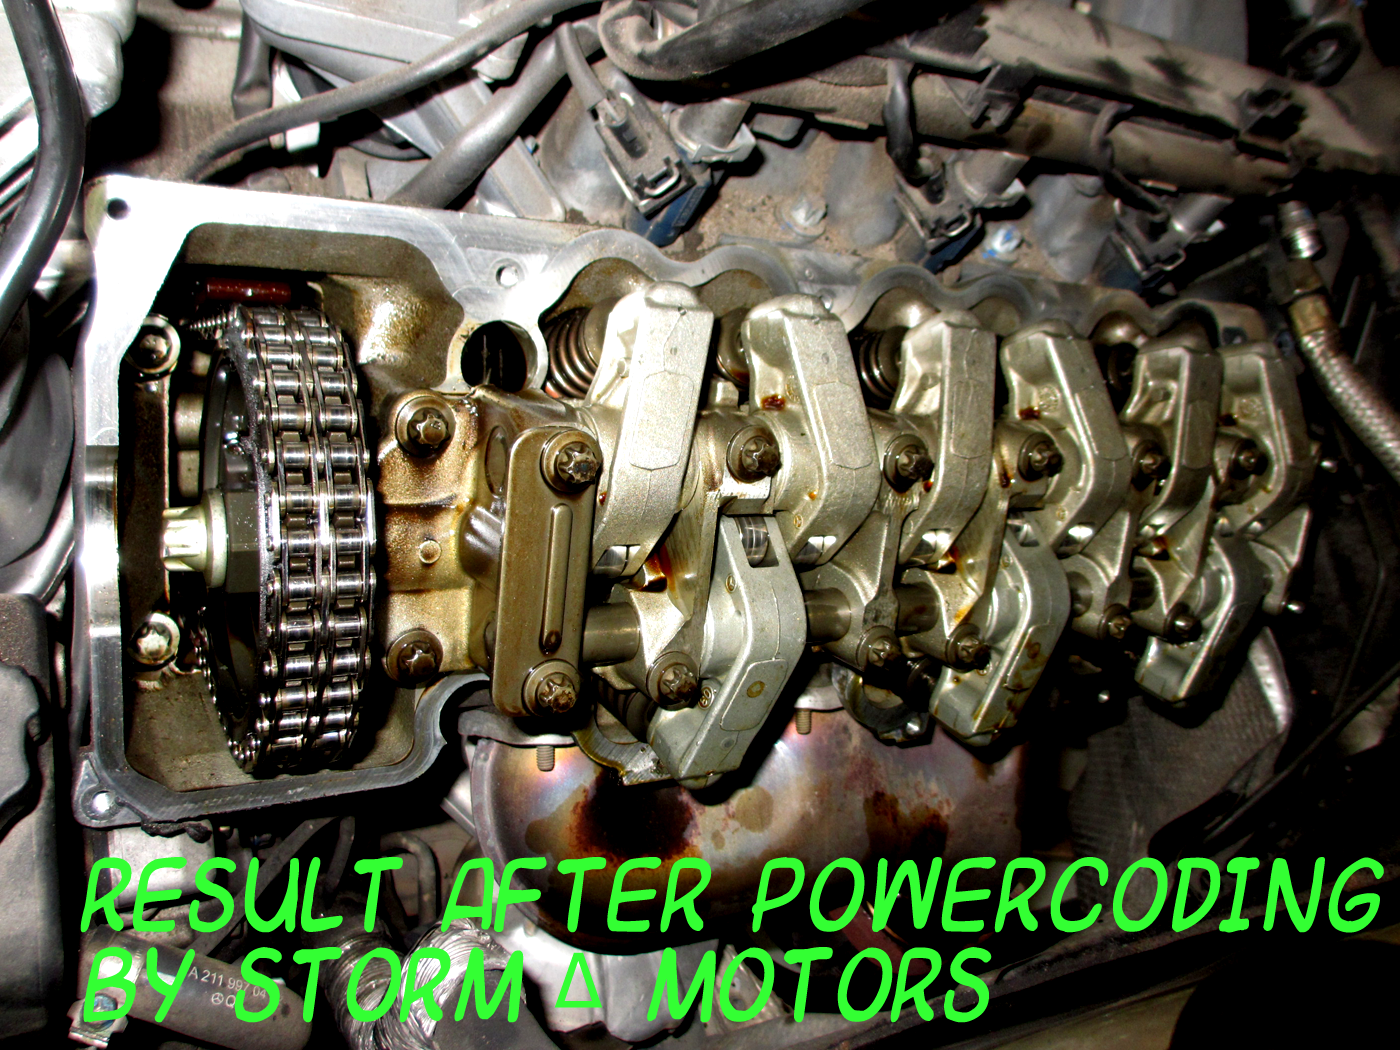 Mercedes–Benz engine after PowerCoding